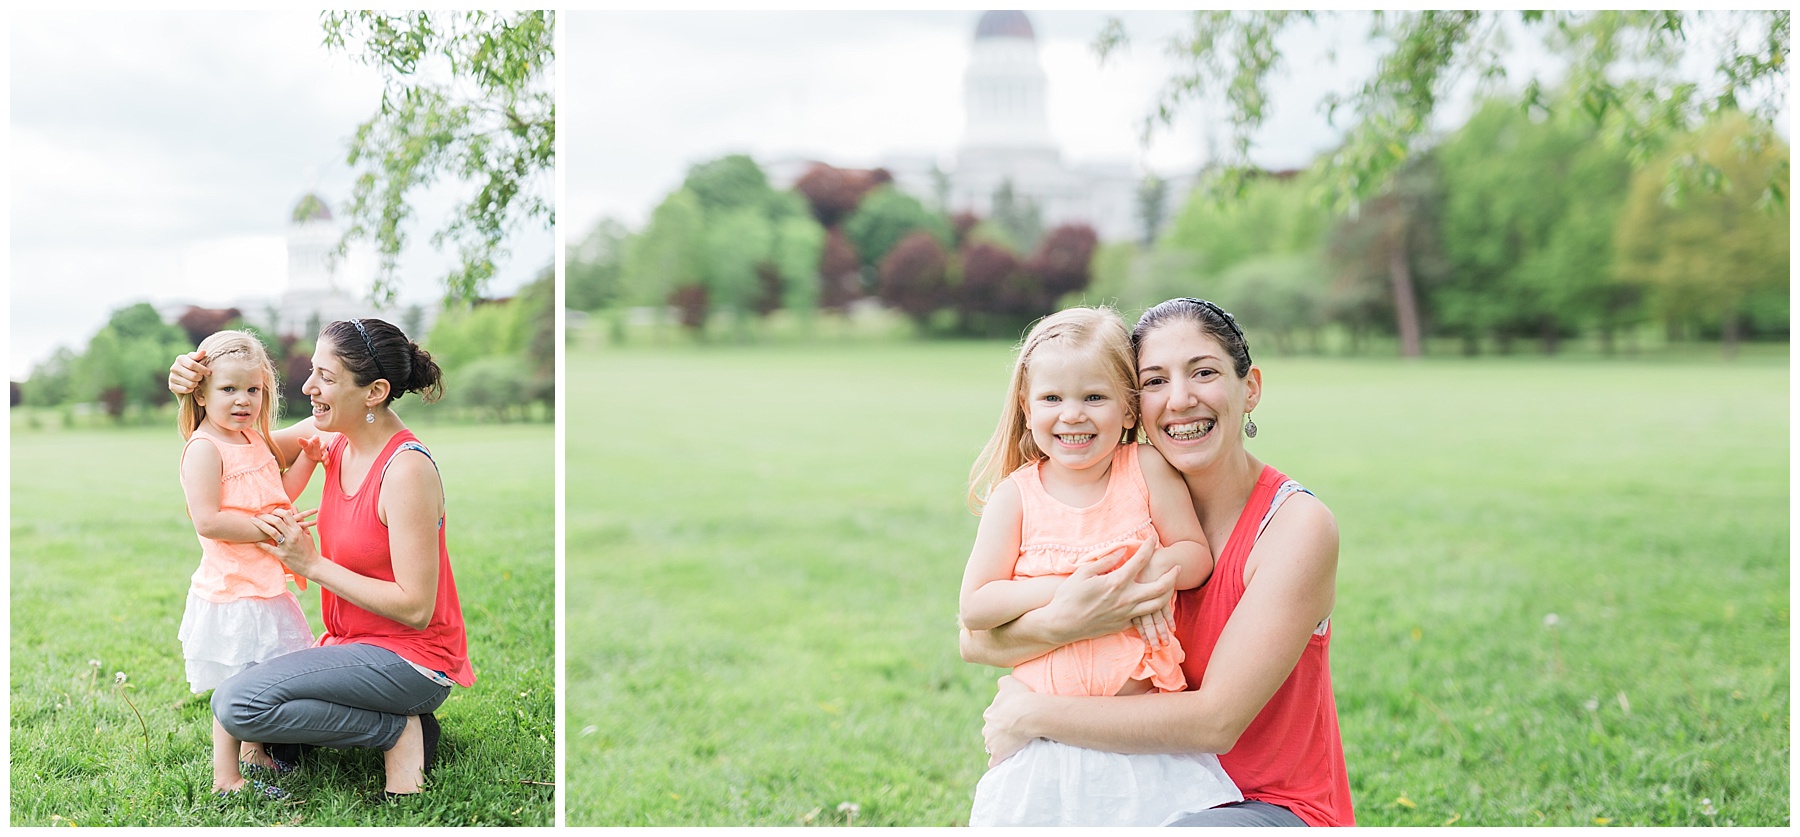 Best Maine Family Photographer in Augusta or Portland